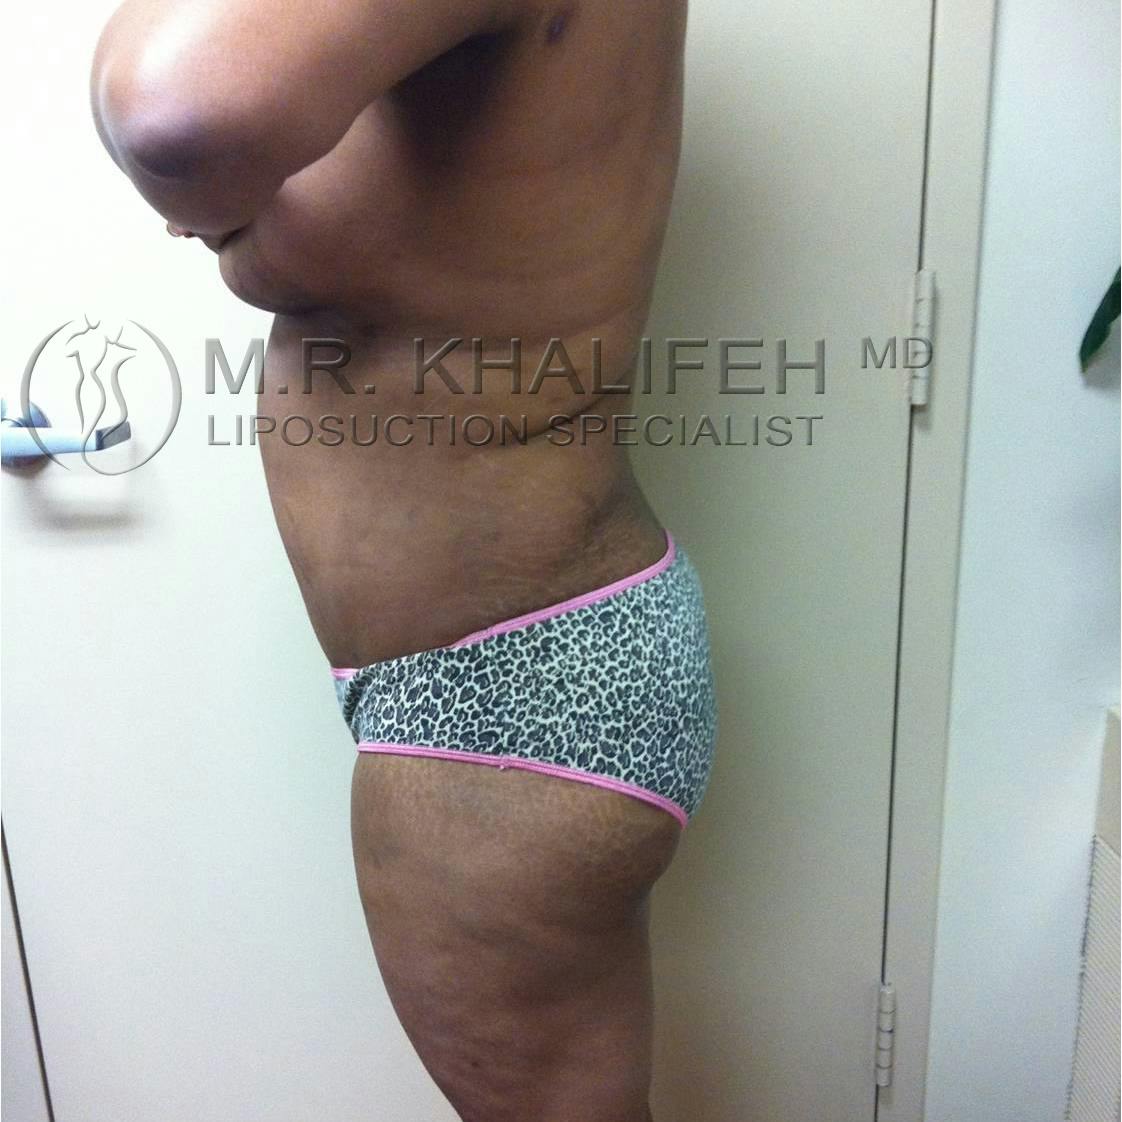 Flank-Lower Back Liposuction Gallery - Patient 3719930 - Image 4